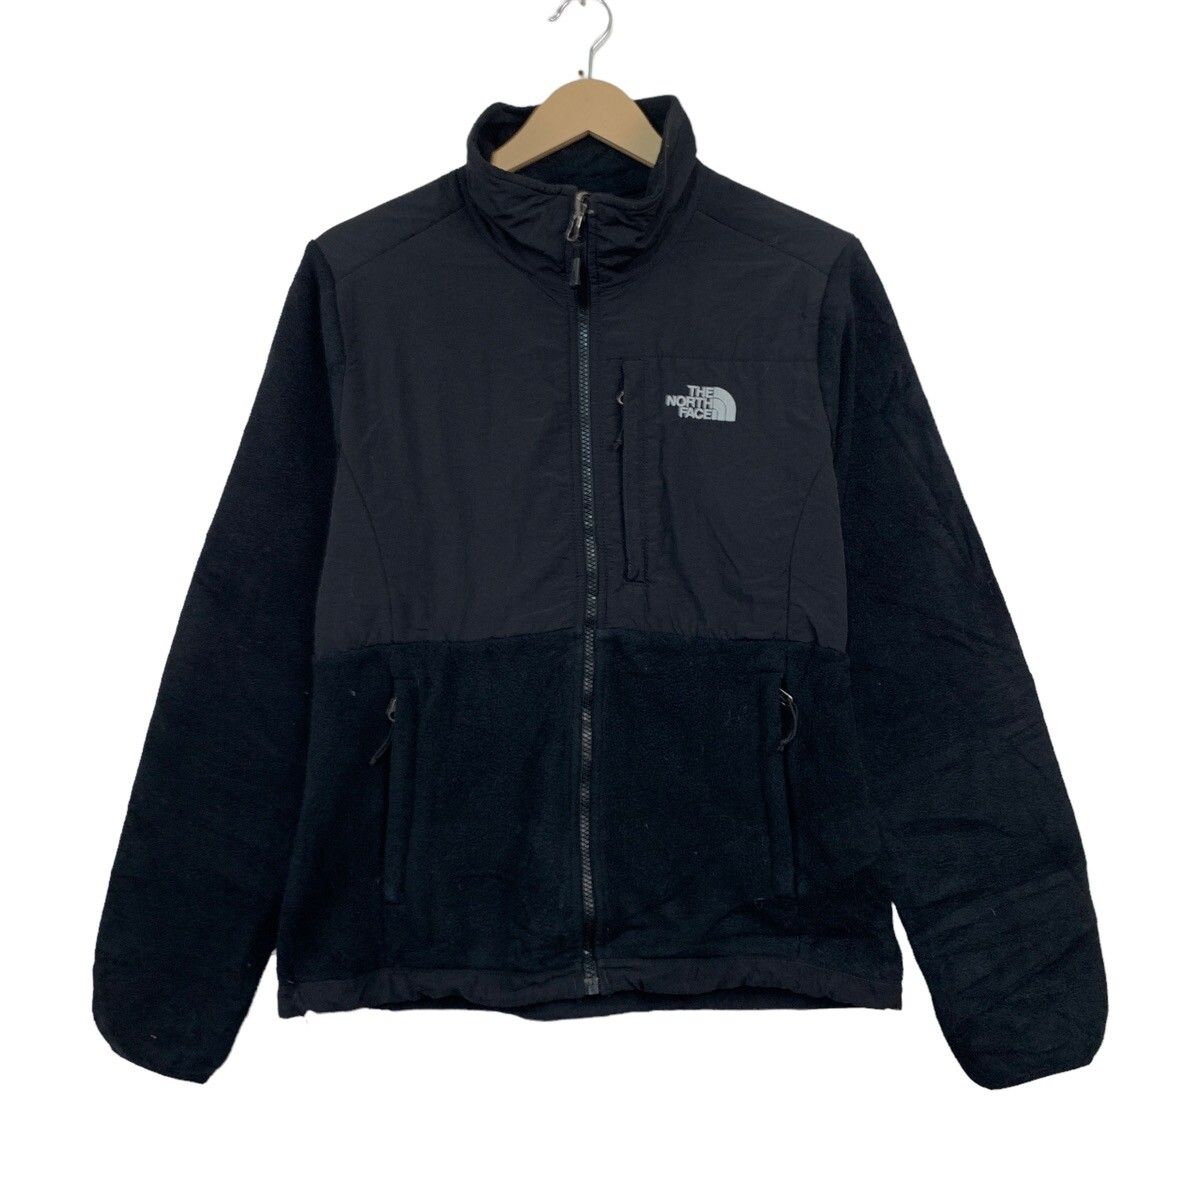 The North Face The North Face Flecee Jacket Polartec Black Size US S / EU 44-46 / 1 - 1 Preview